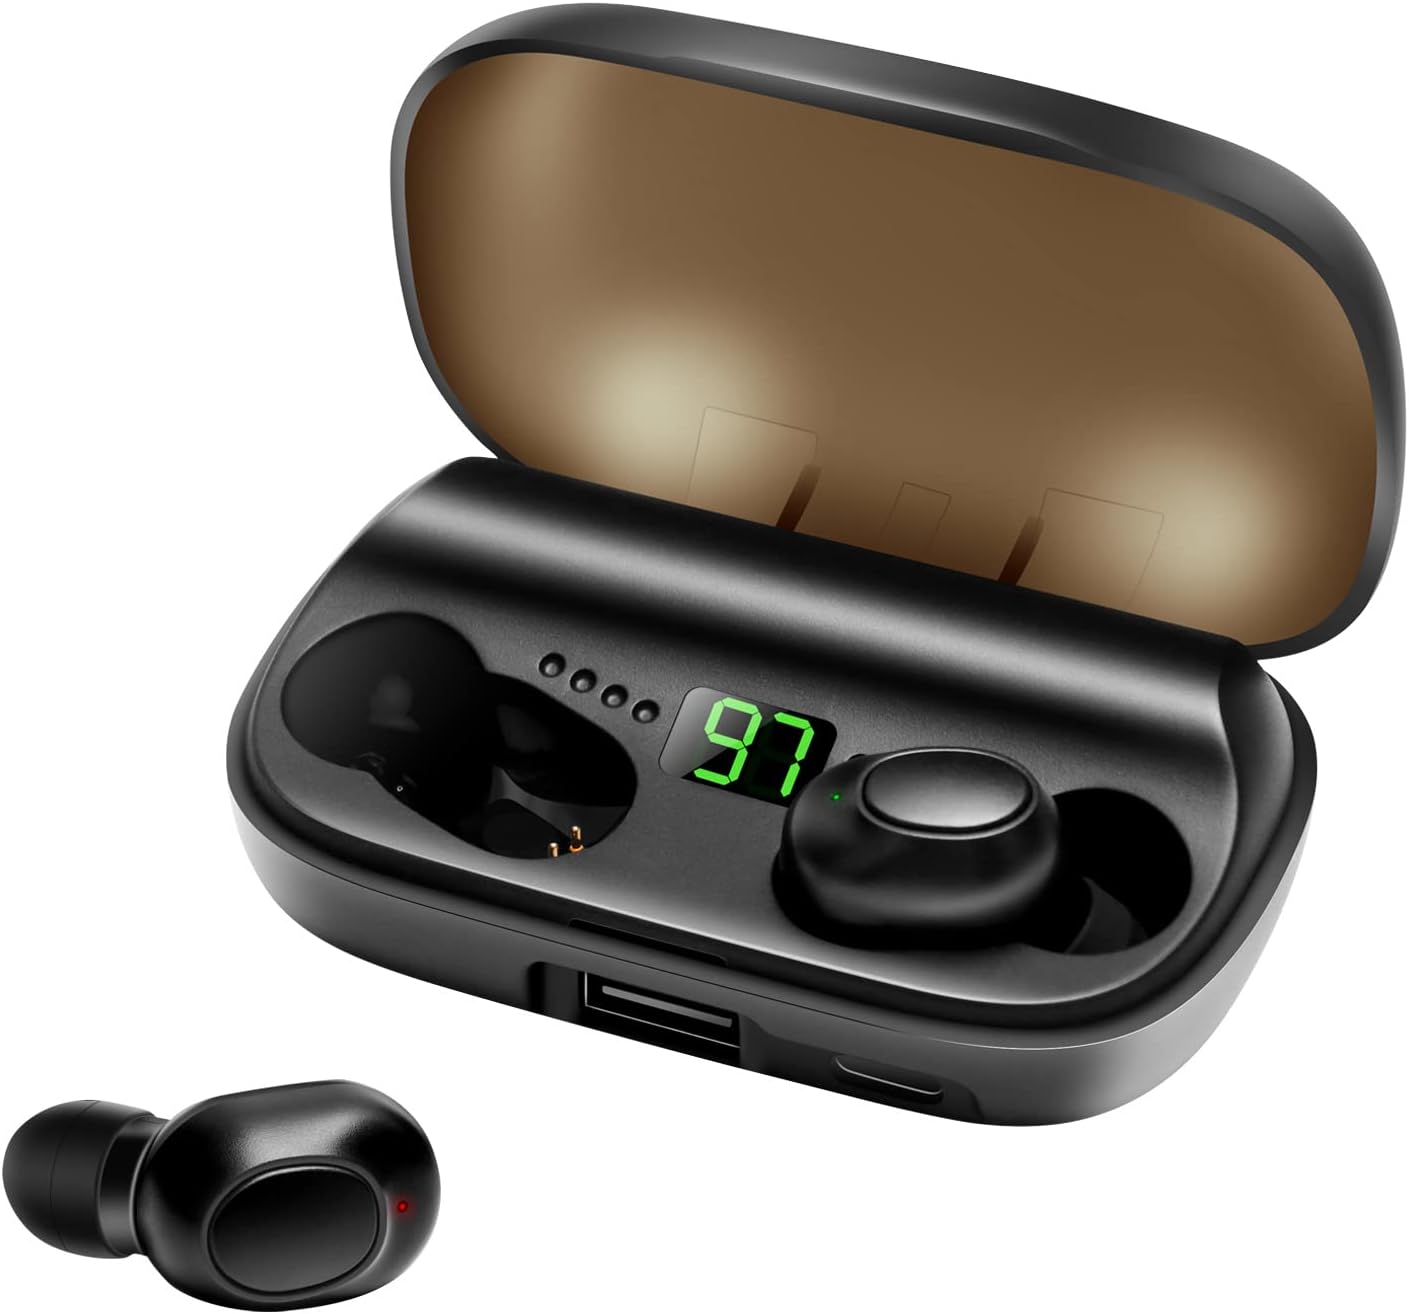 Joincee Hearing Aids Review